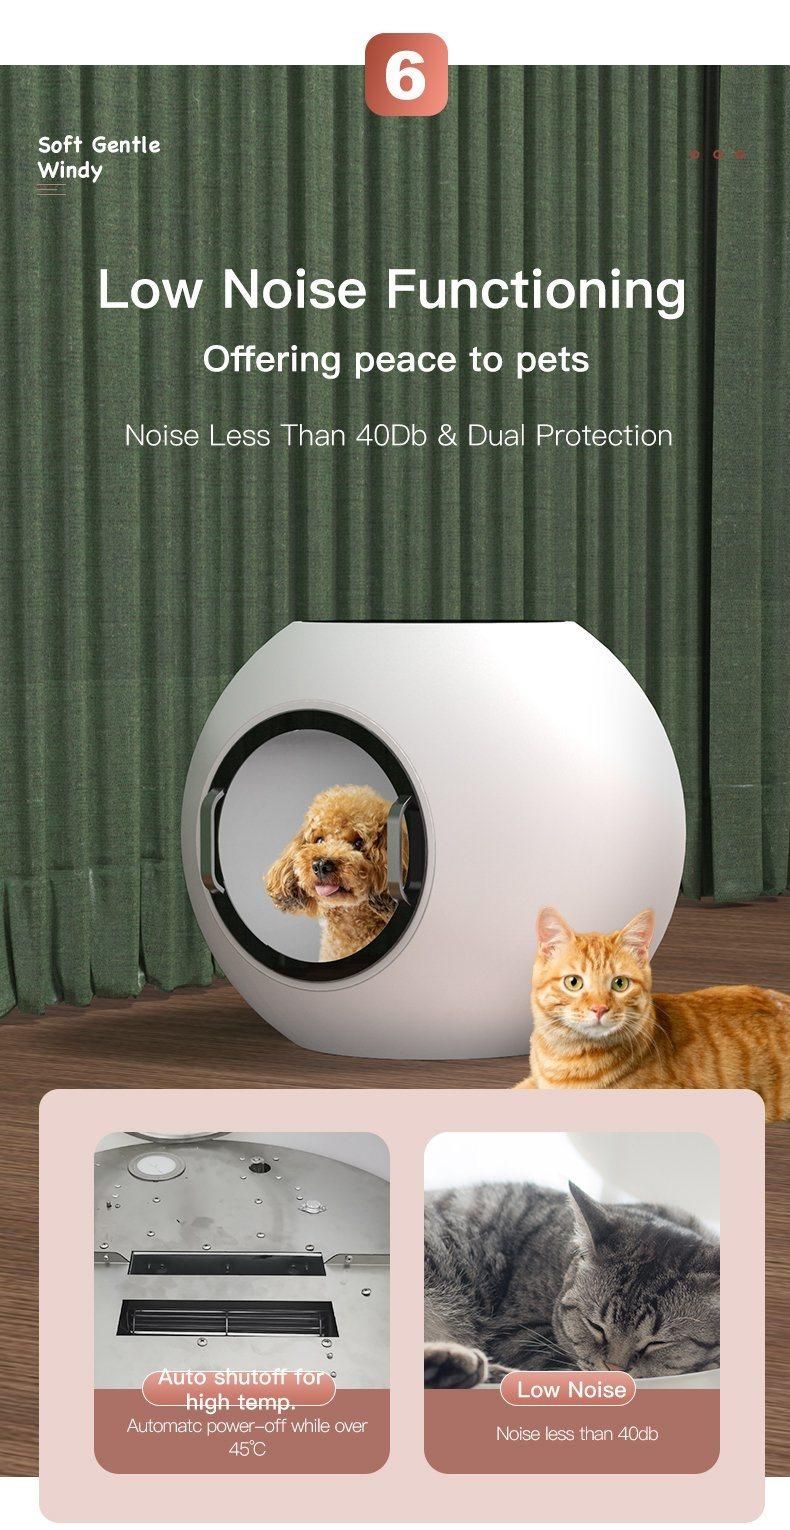 Digital Control and Multi-Functional Pet Hair Dryer with UV